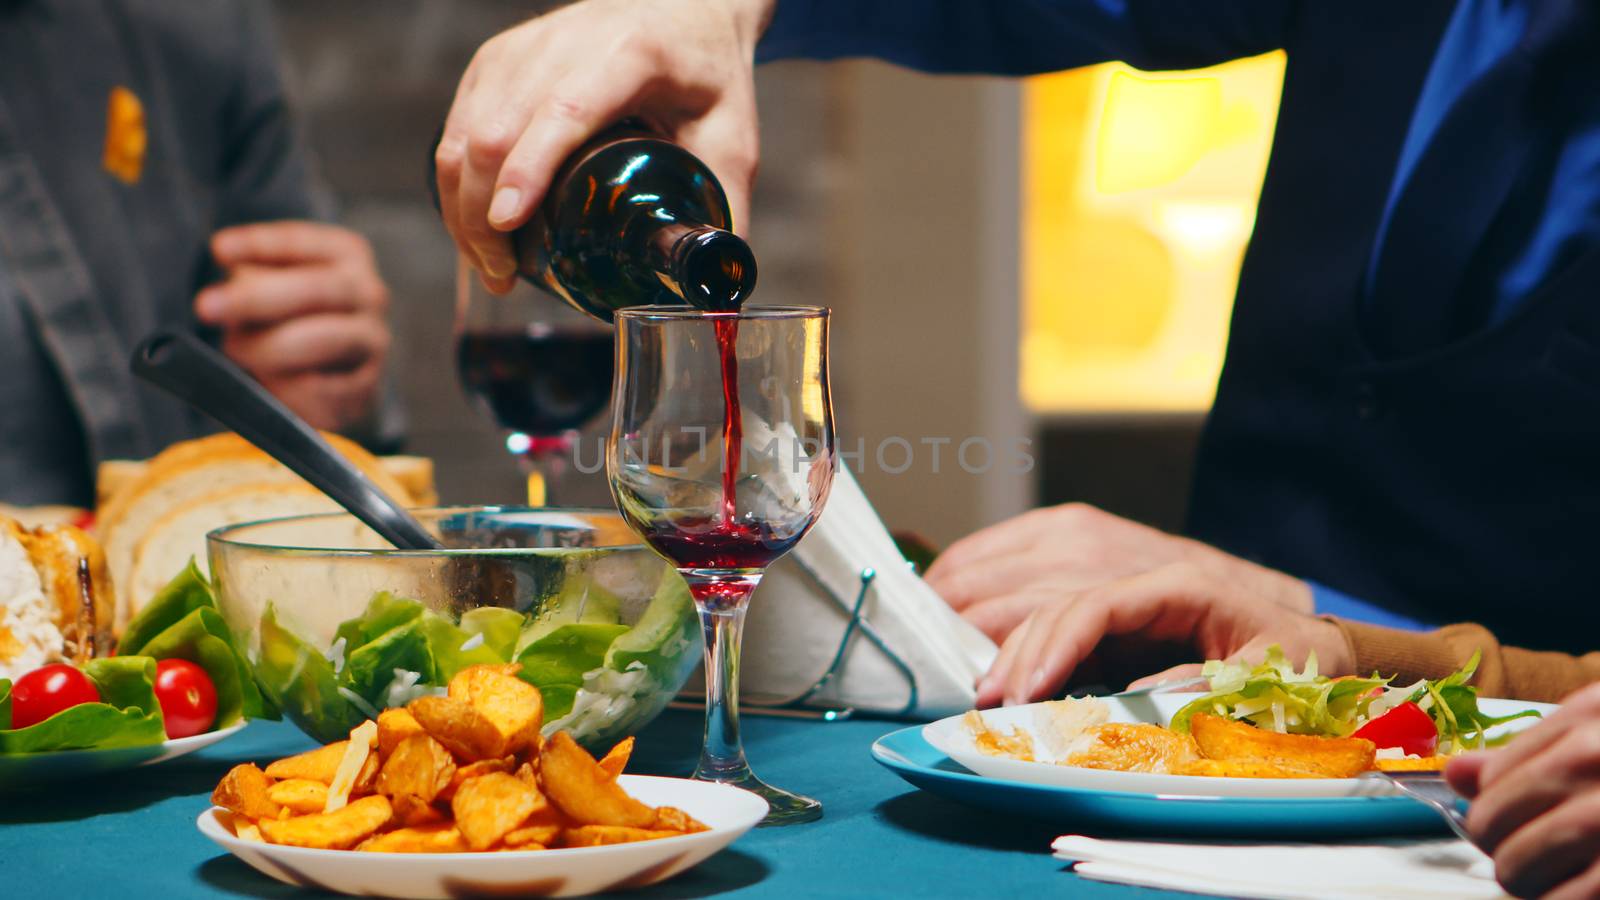 Zoom in shot of young man pouring red wine into a glass at family dinner.